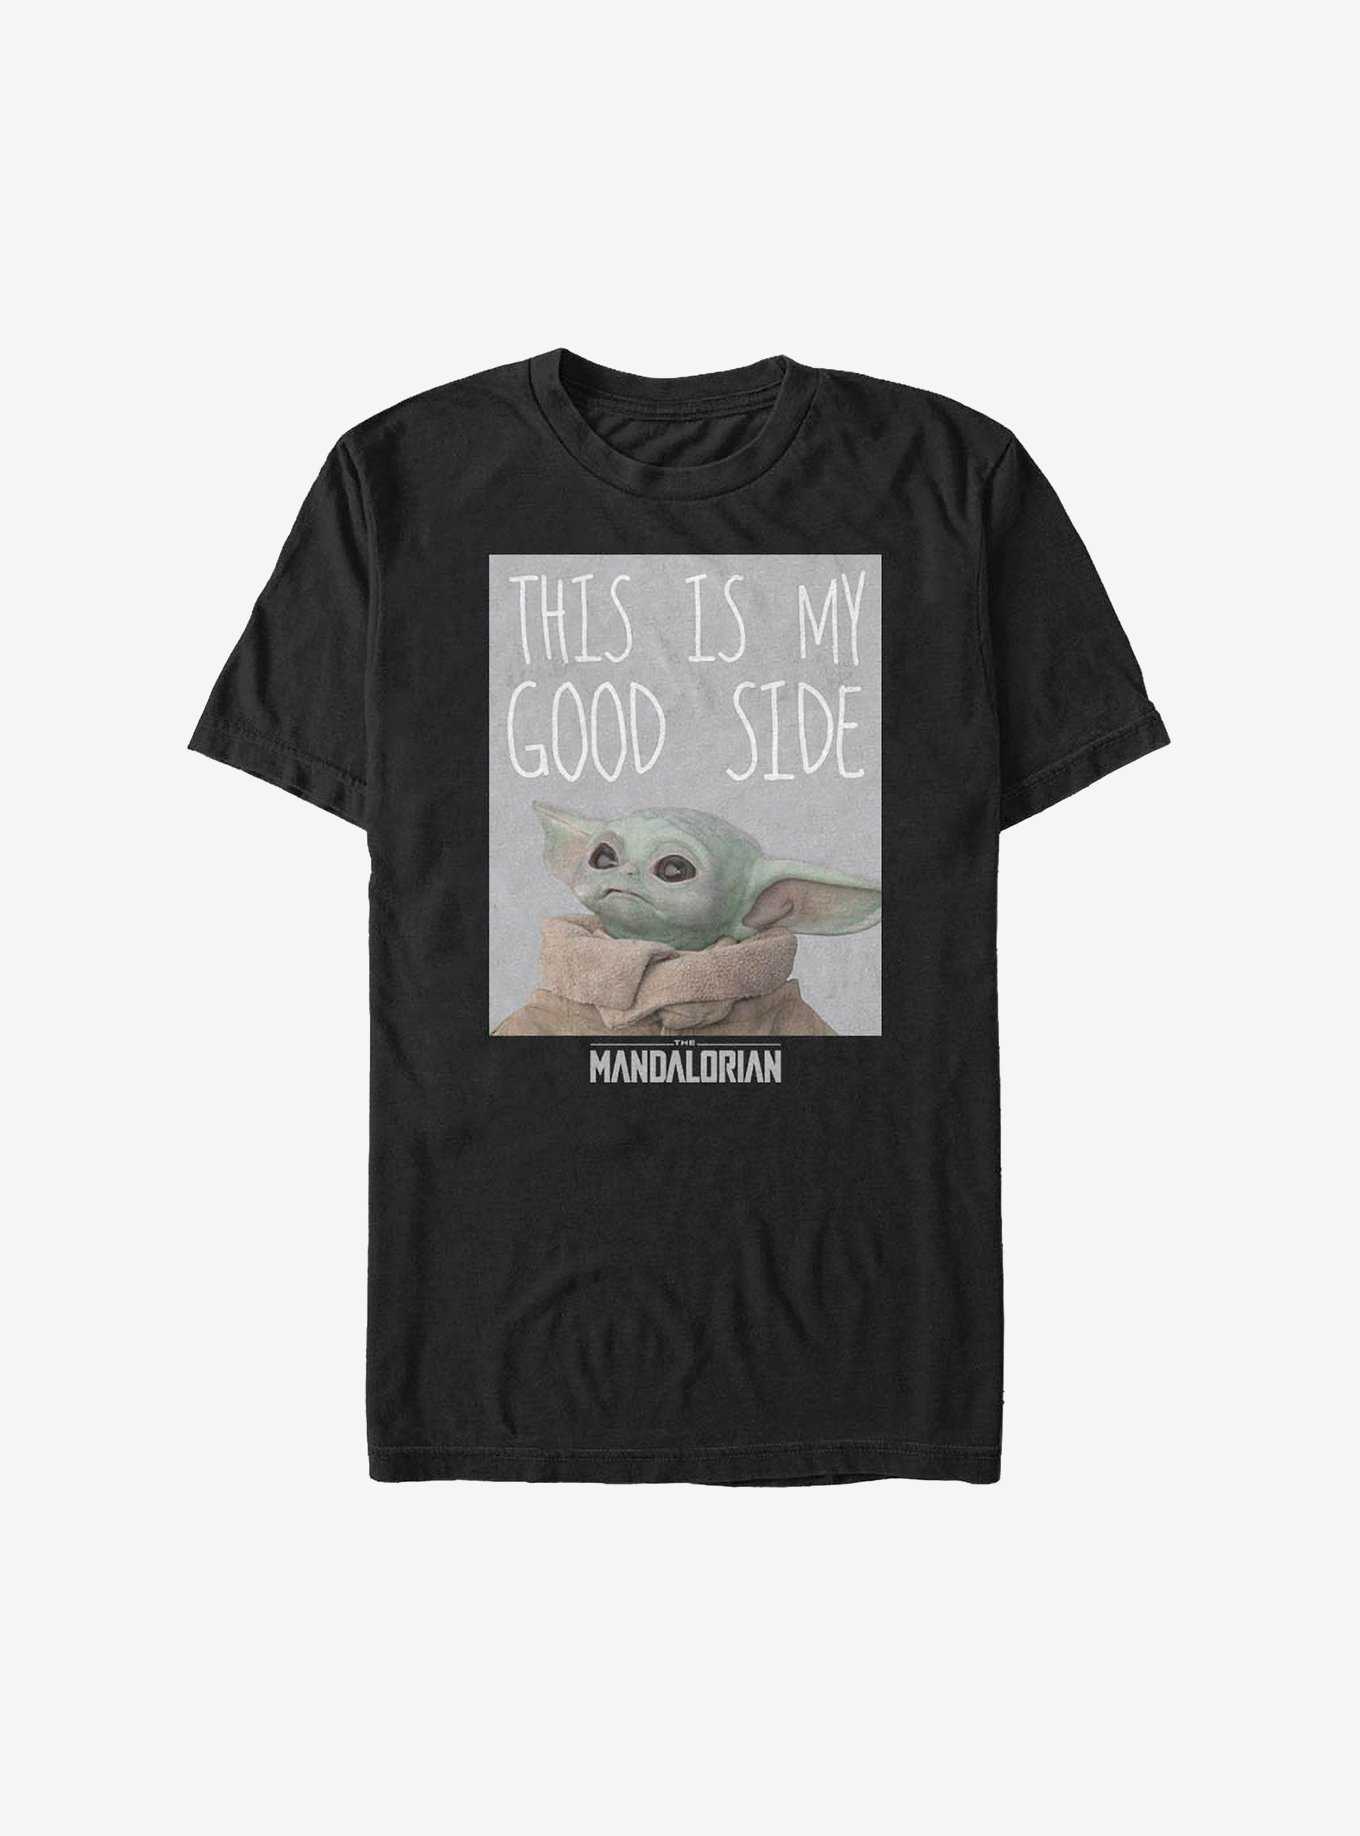 Extra Soft Star Wars The Mandalorian The Child Good Side T-Shirt, , hi-res